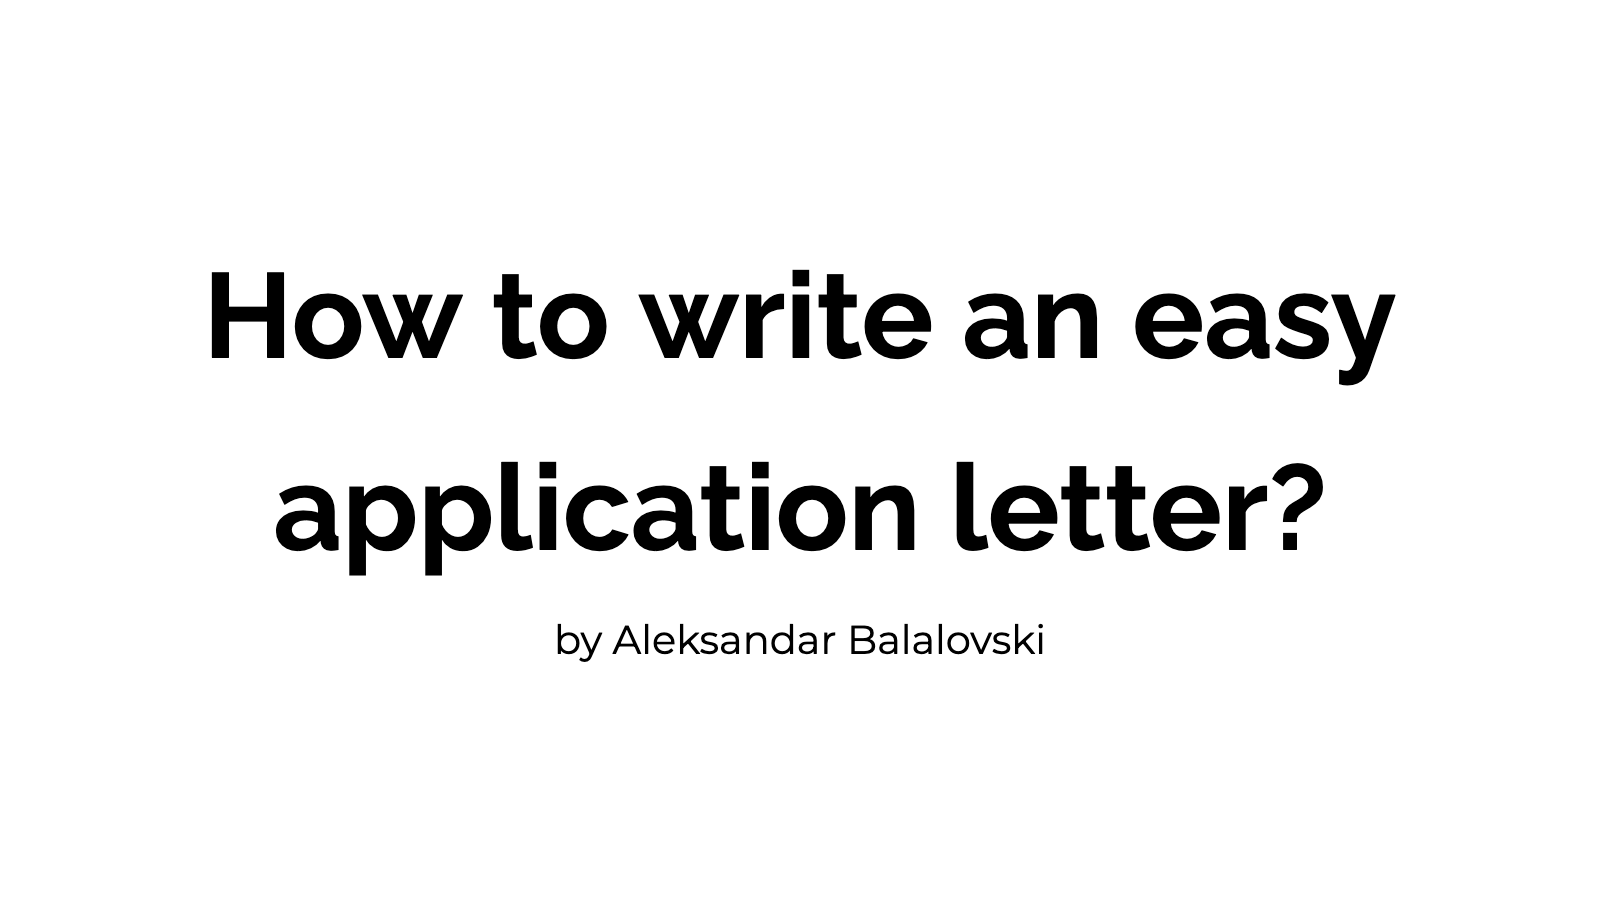 is application letter handwritten or typed